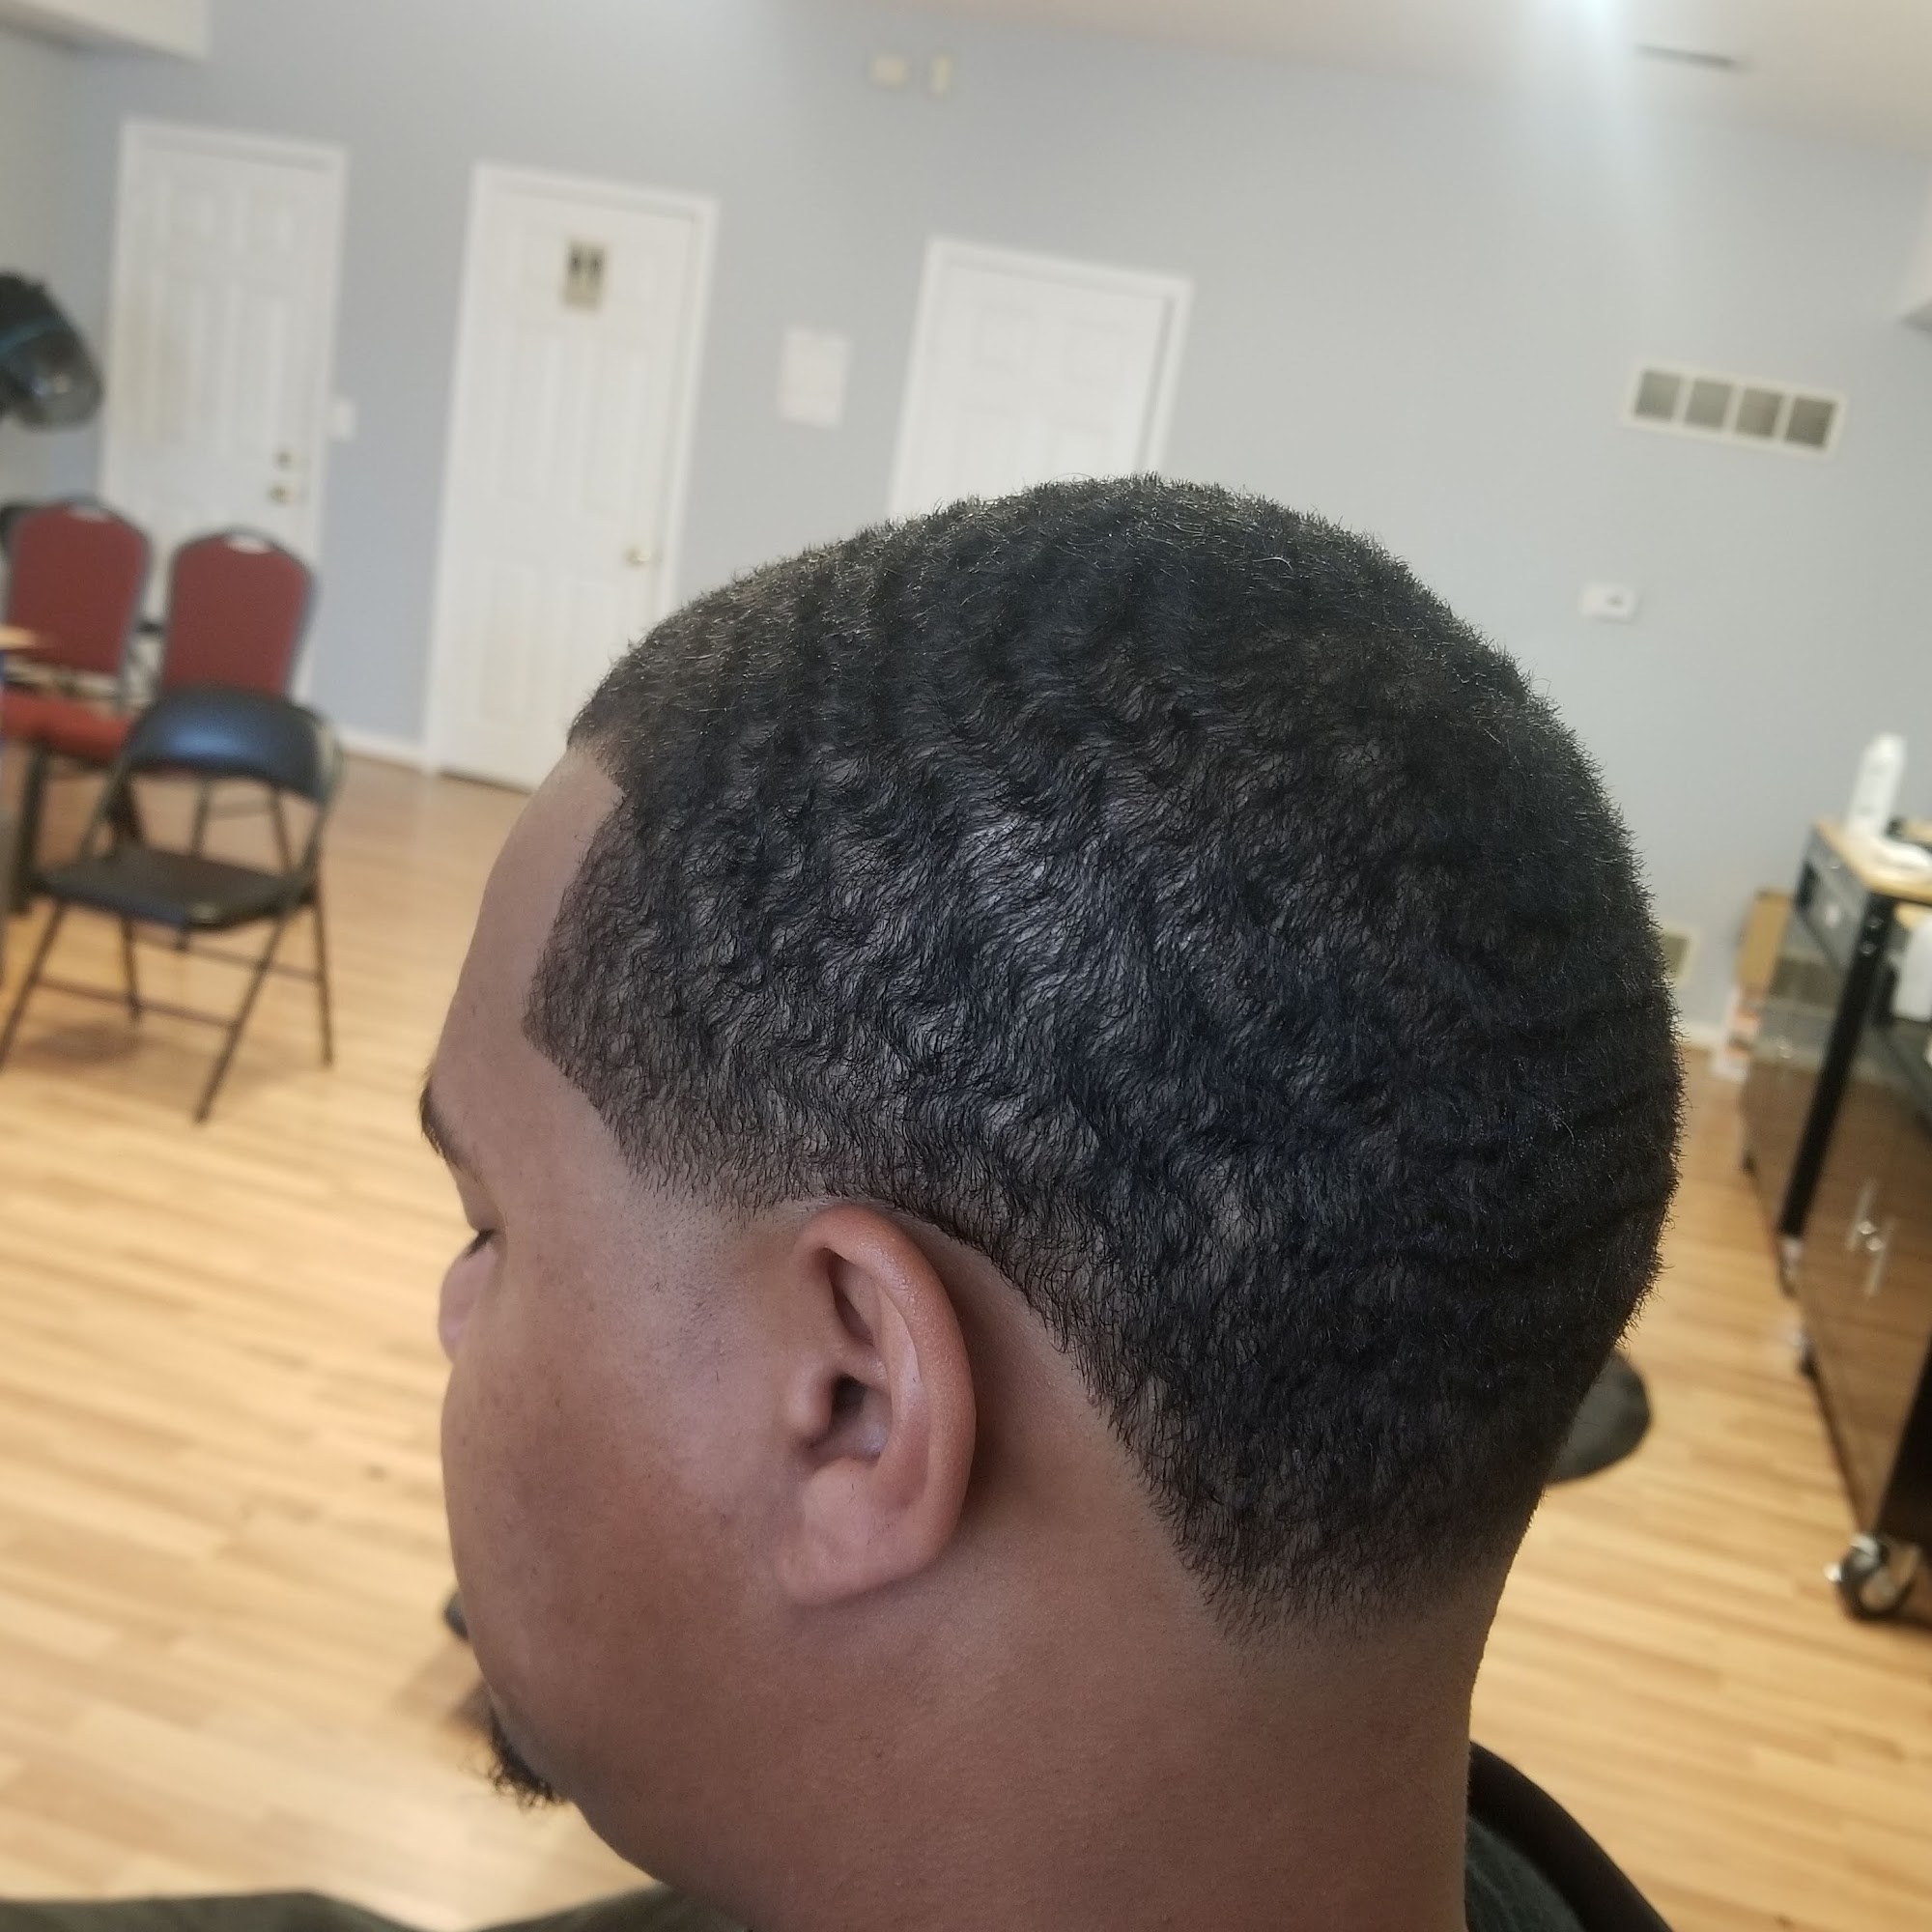 Protege's Cuts 4317 Dixie Hwy, Elsmere Kentucky 41018